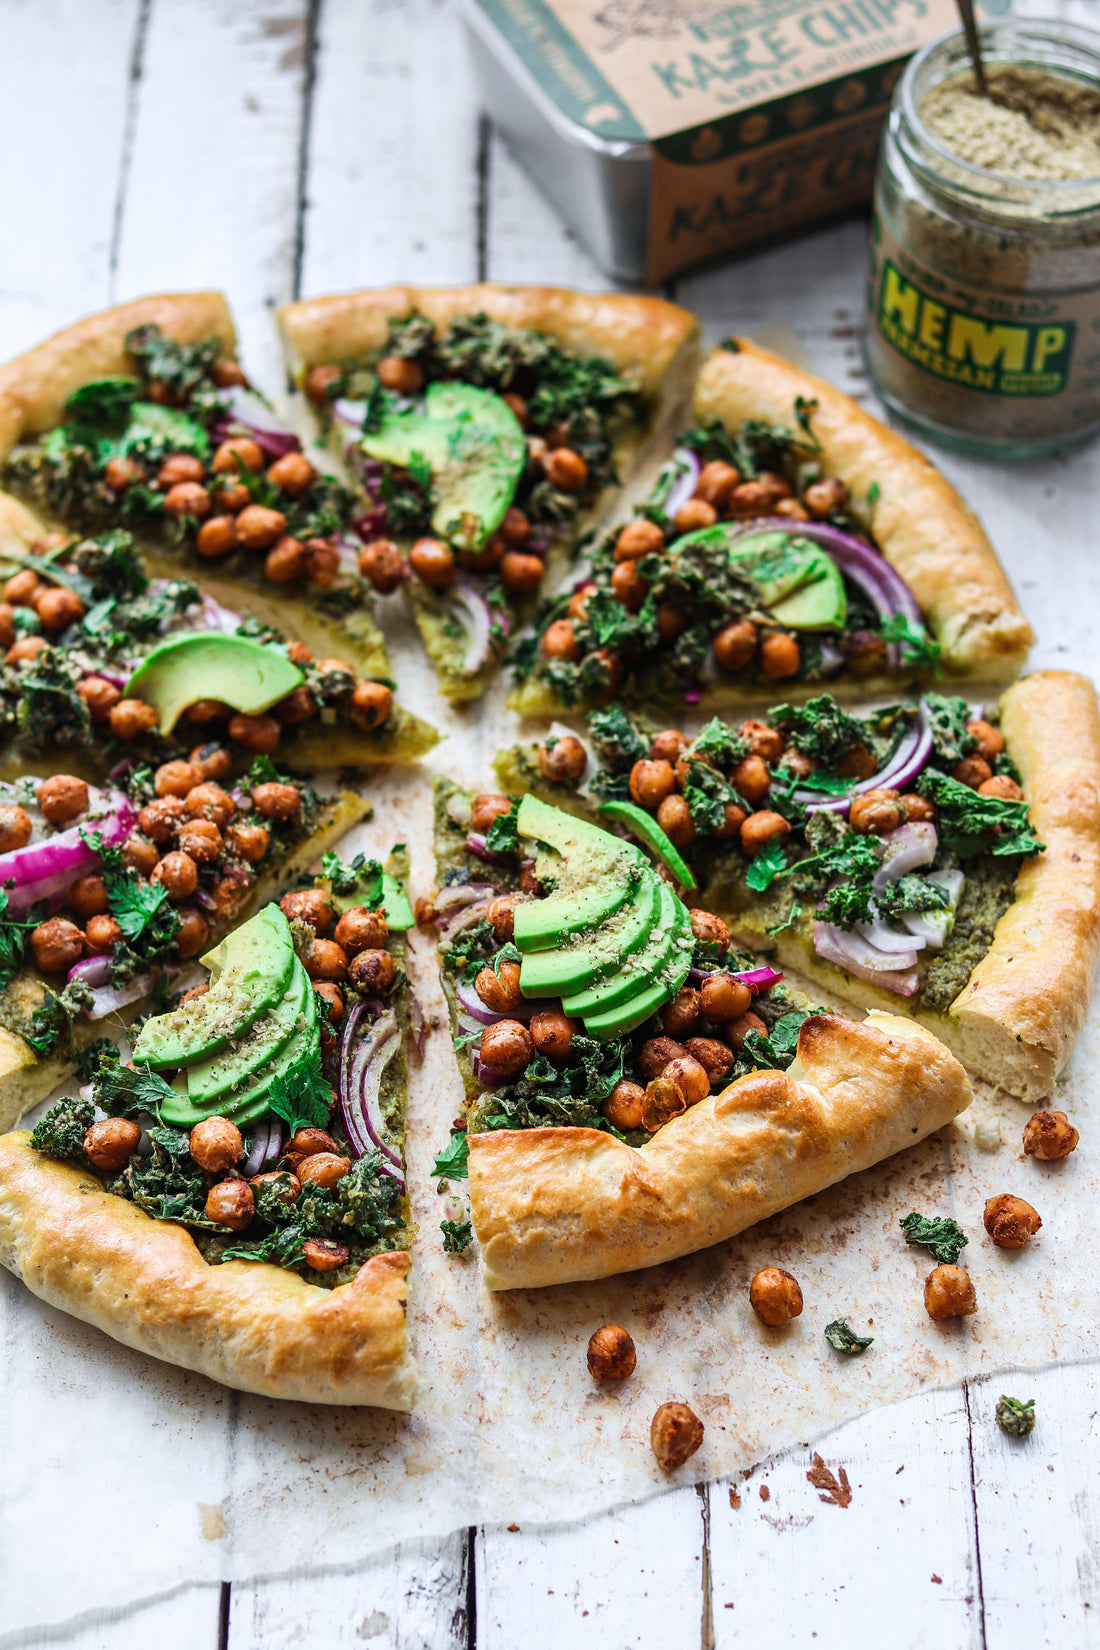 Homemade Vegan Pizza Topped with Hemp Parmesan and Kale Chips | Vegan Diet